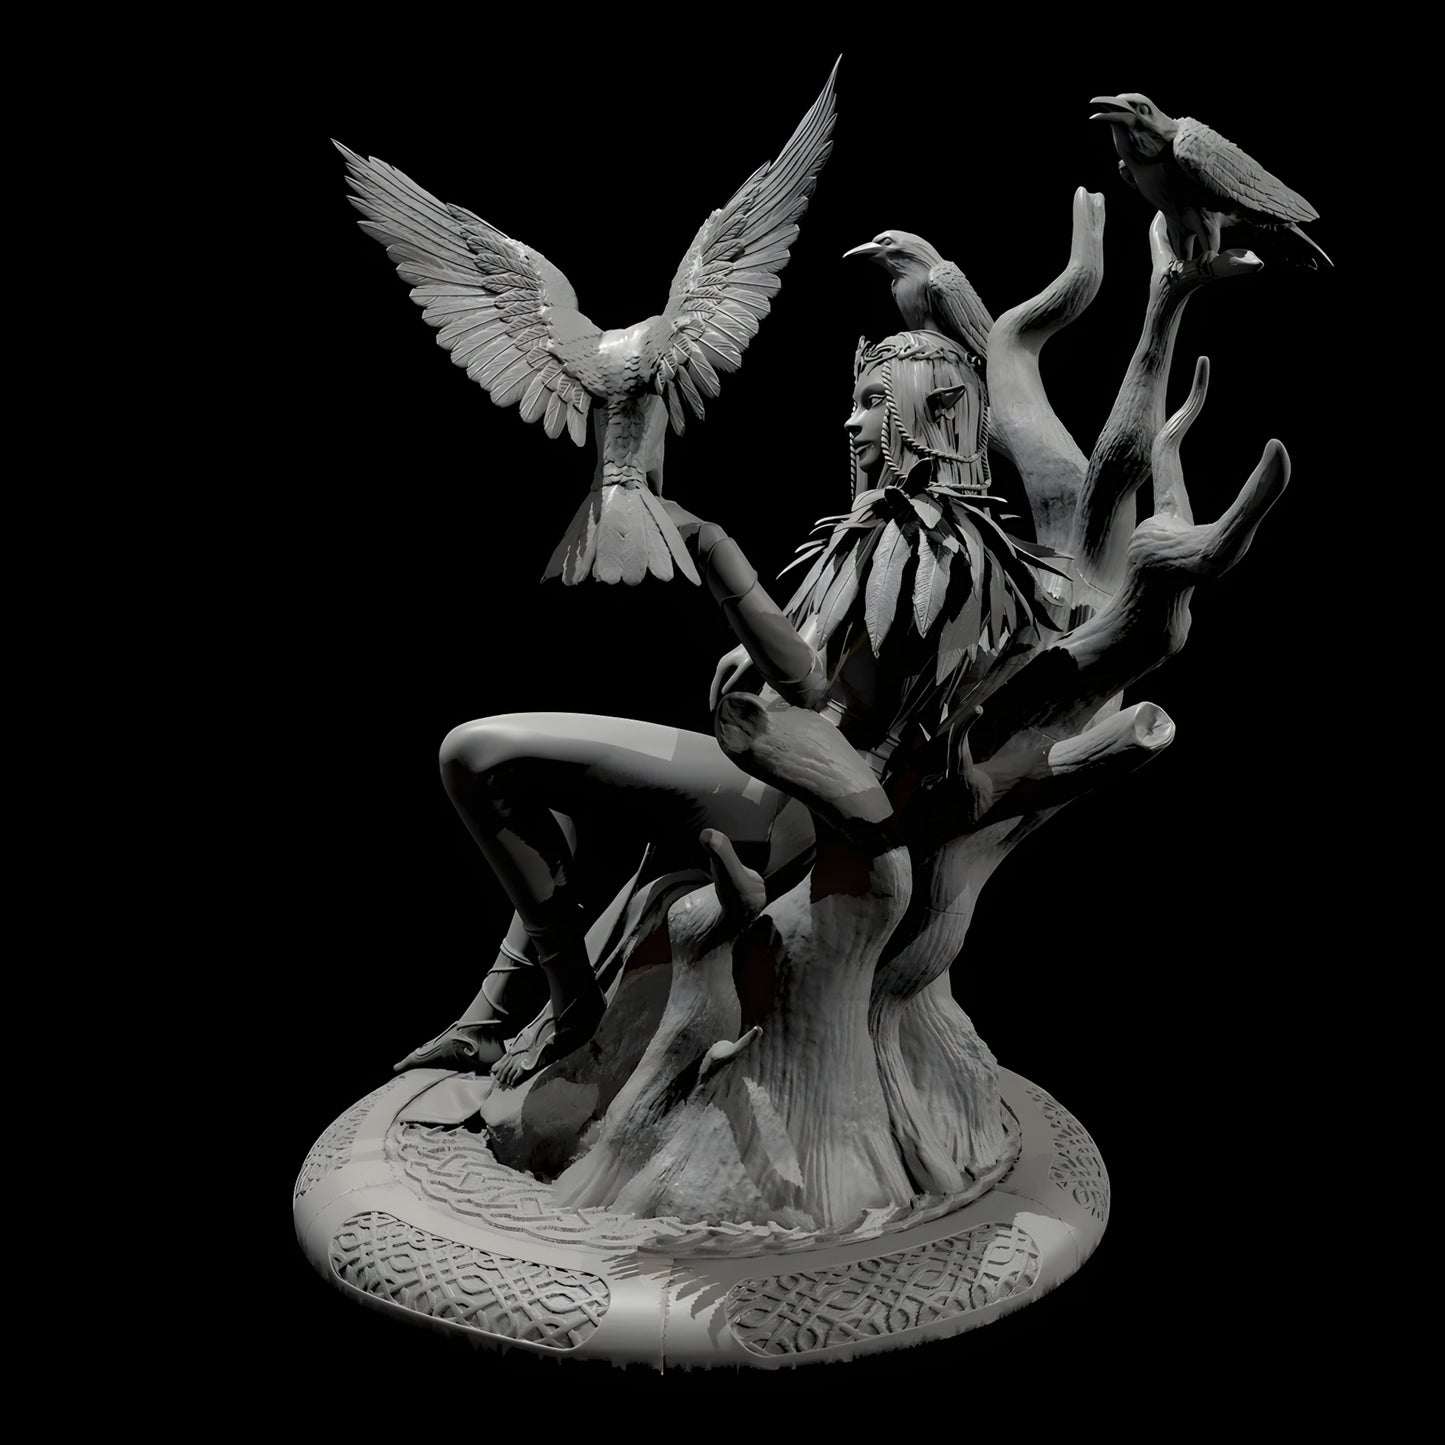 18+ Collector's 3D Printed Model: The height of man 25mm 45mm 65mm Resin model kits figure beauty colorless and self-assembled （3D Printing).